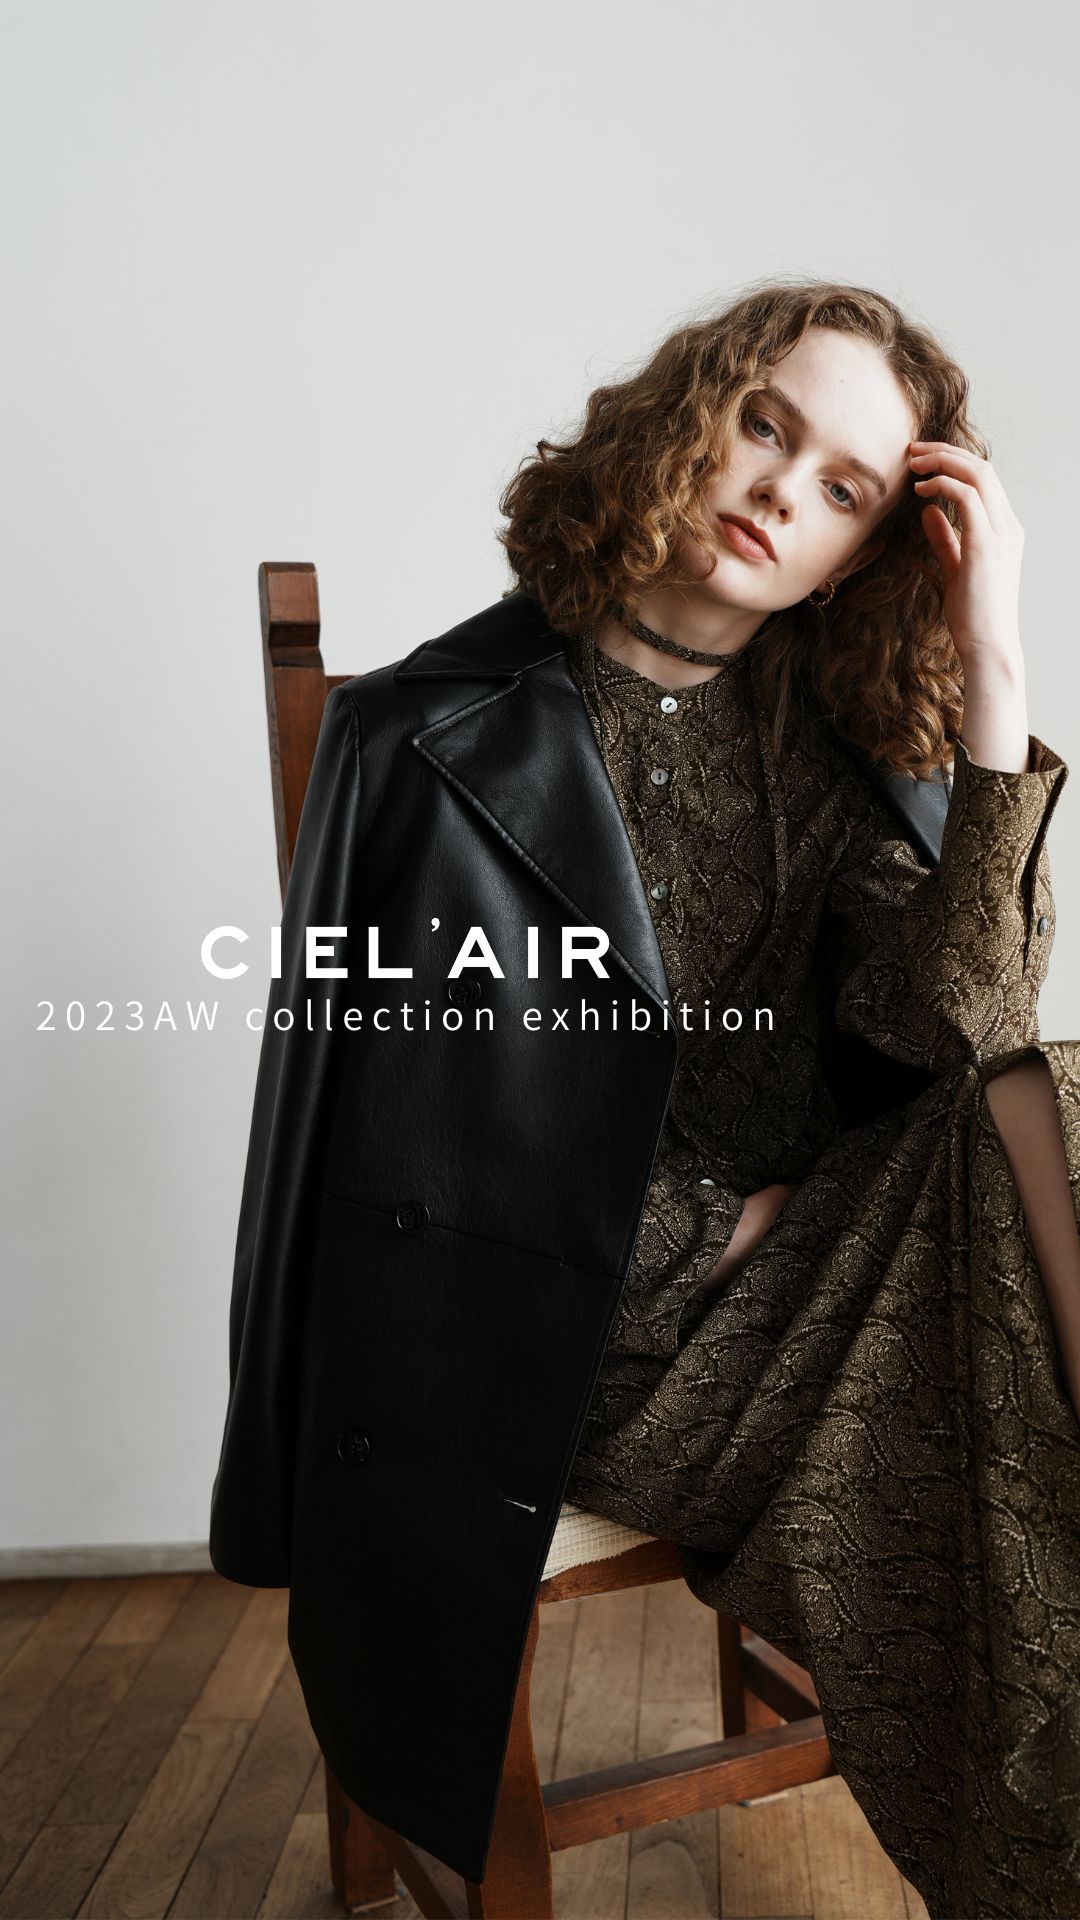 ■CIEL'AIR 2023AW 展示会開催のお知らせ■